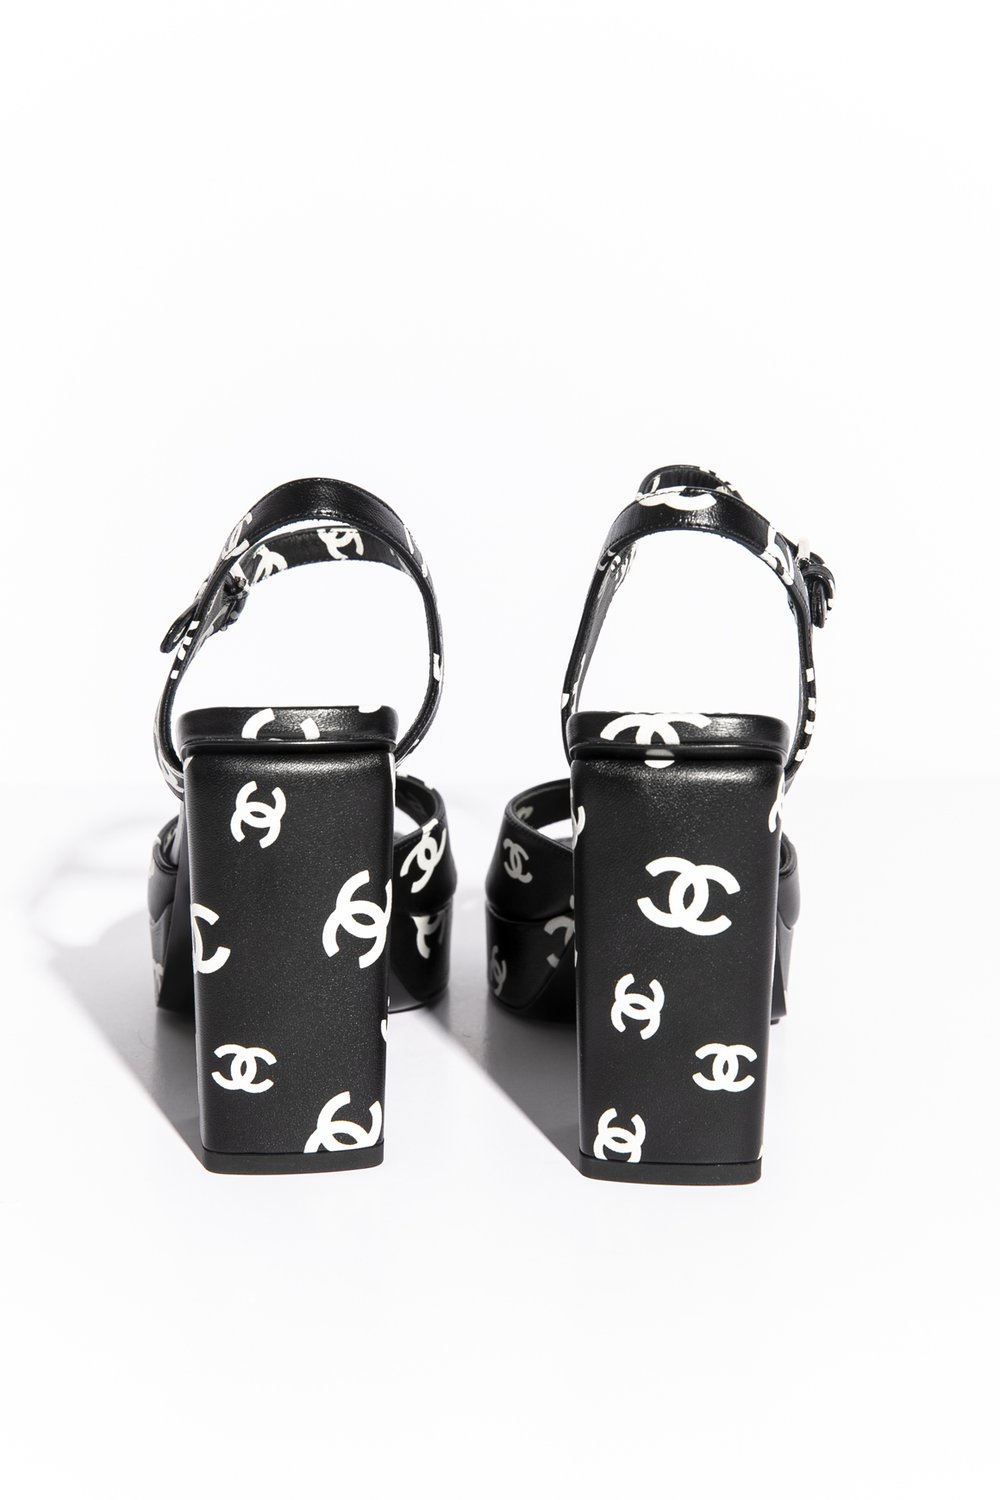 Chanel Black White Leather Quilted Wedge Sandals Size 35.5/5 - Yoogi's  Closet